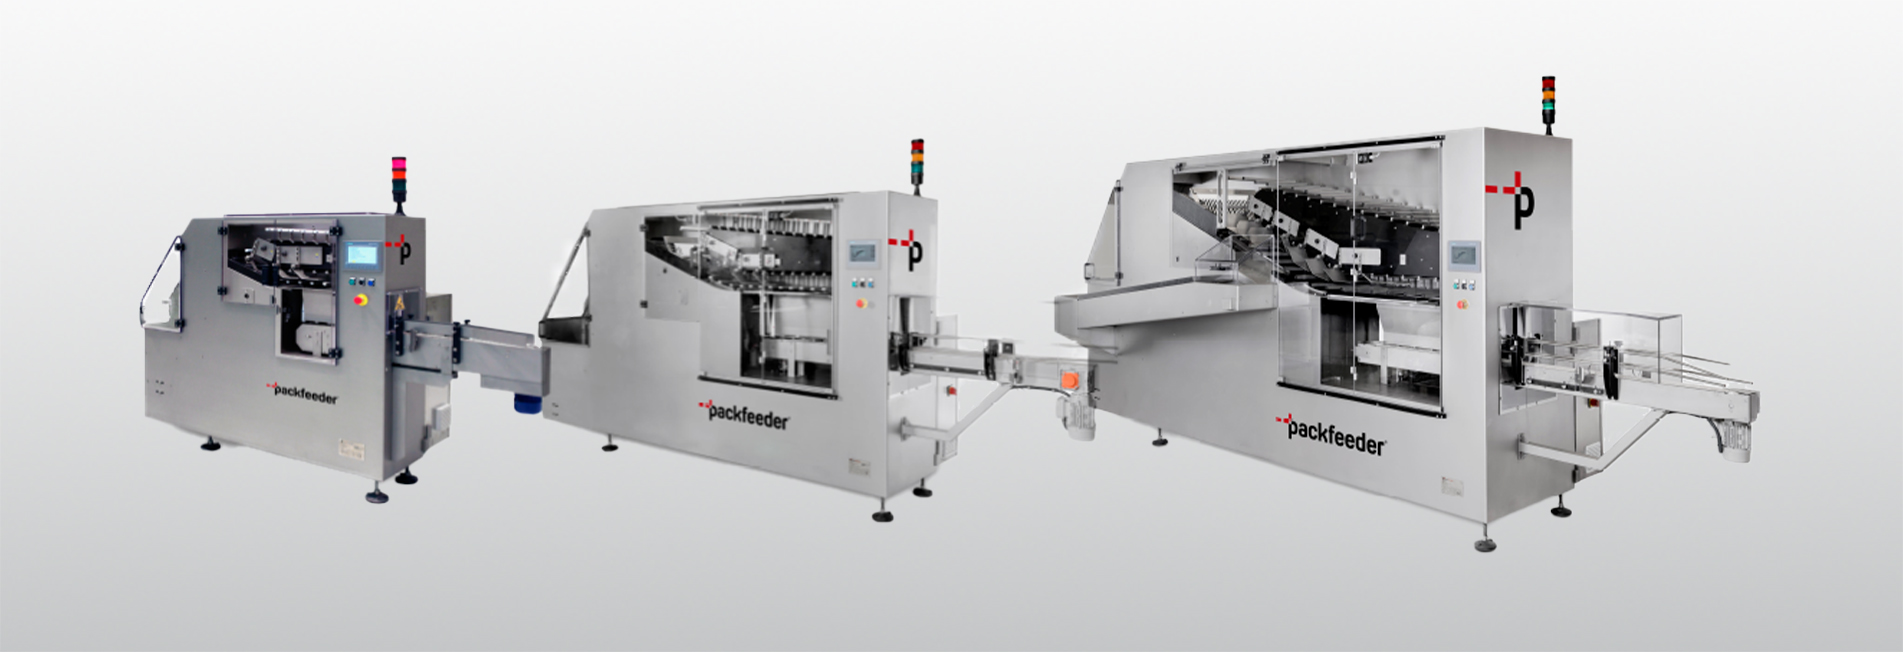 Rotzinger Group - Packfeeder's In-Line System